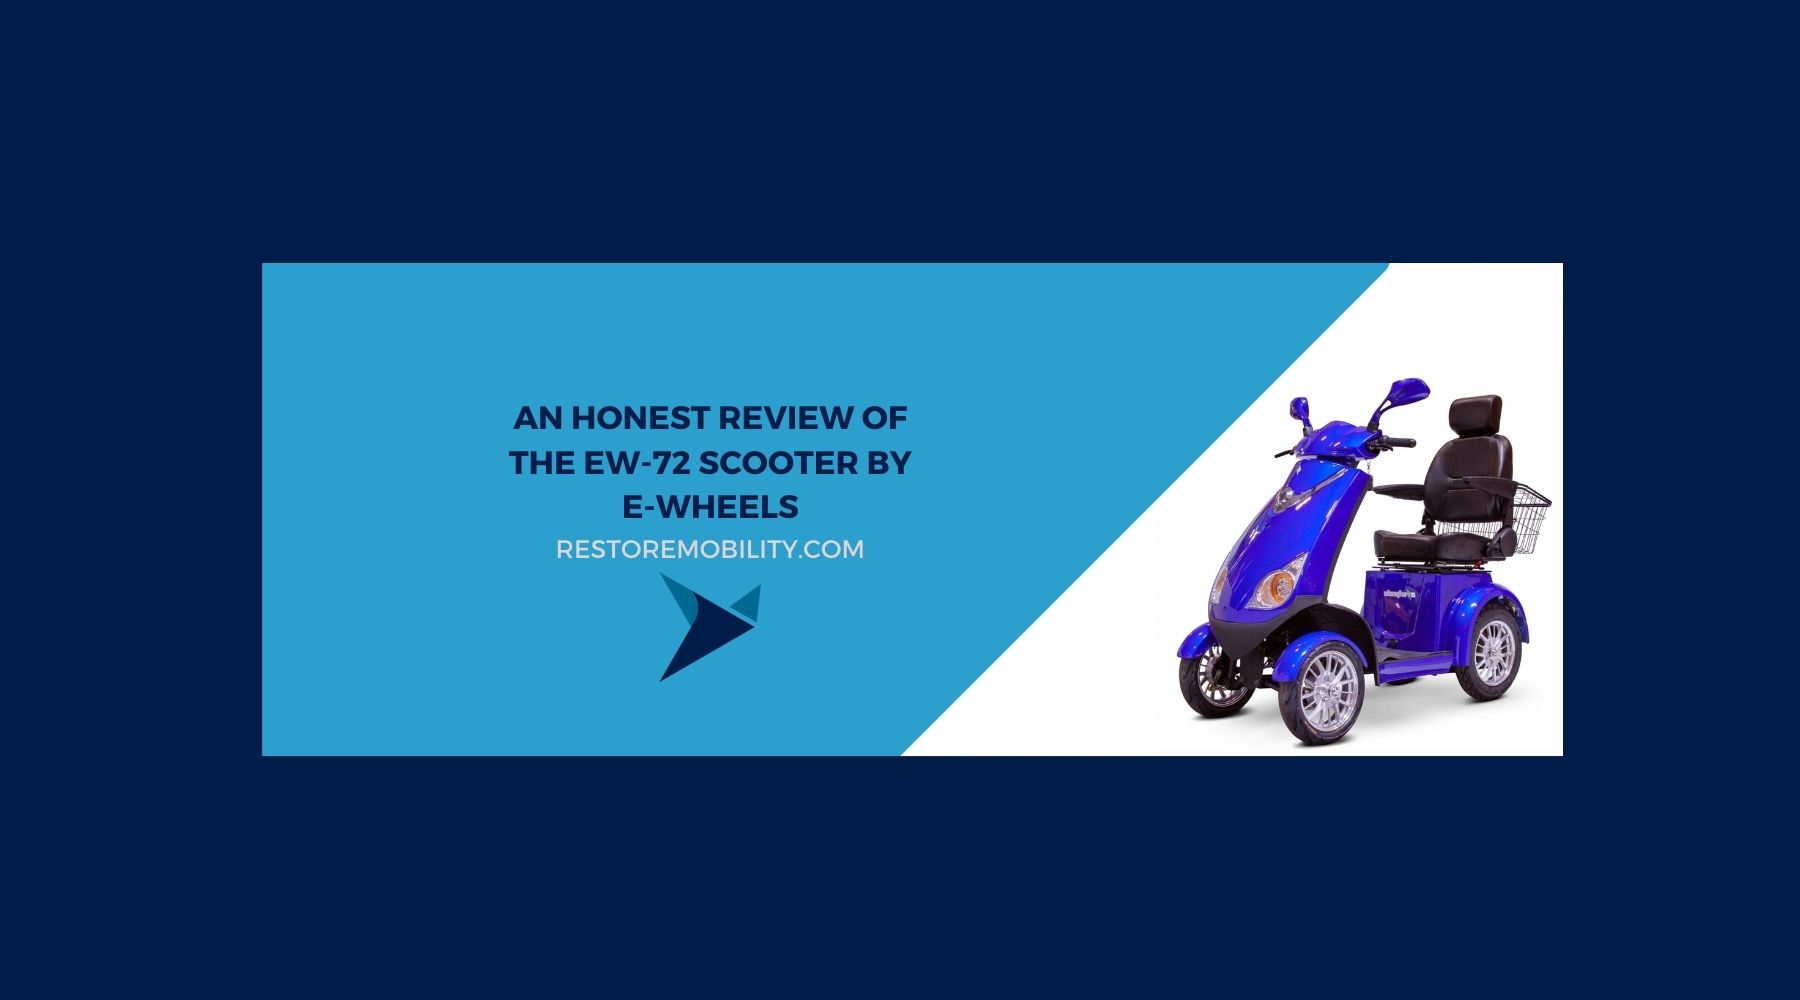 An Honest Review of the EW-72 Scooter by E-Wheels